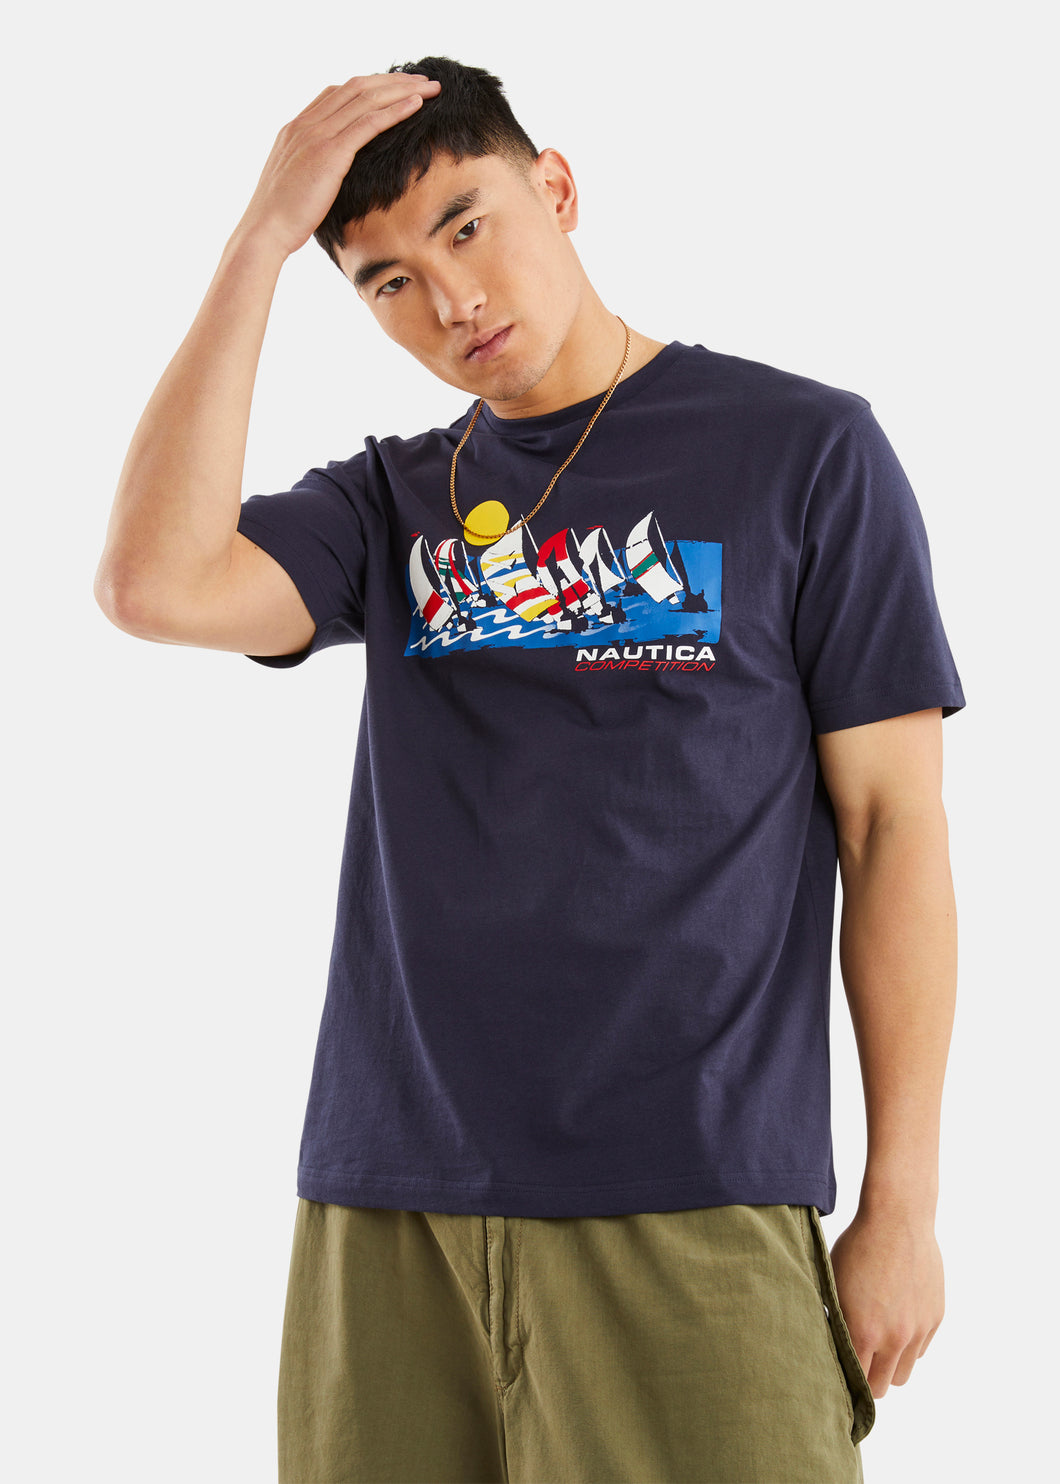 Nautica Competition Aland T-Shirt - Dark Navy - Front